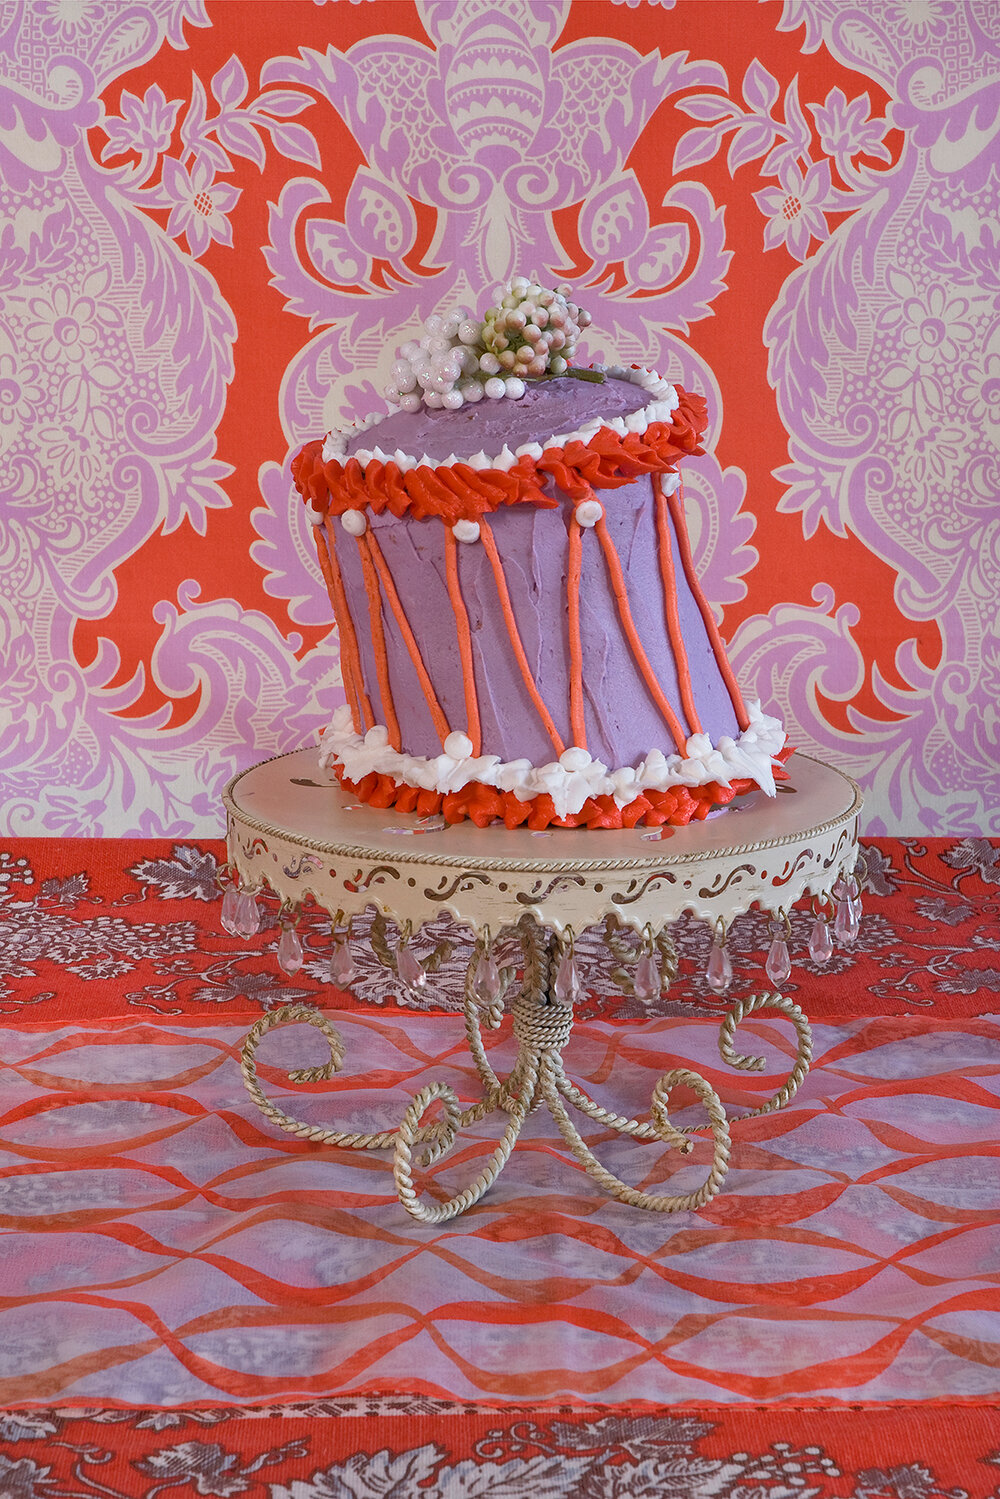   *Confections (adorned) #13, 2010  